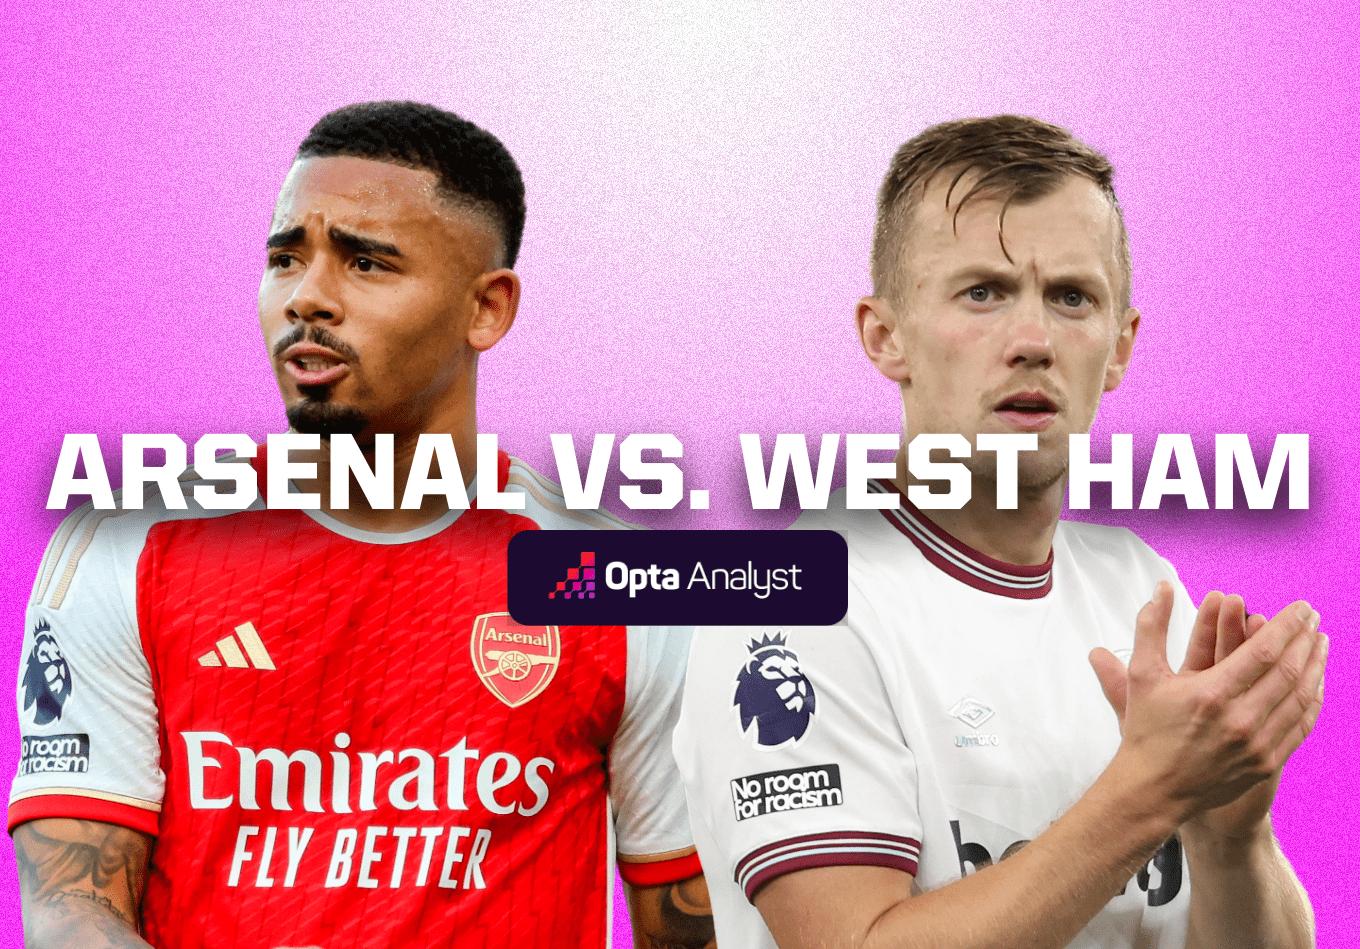 Arsenal vs West Ham: Prediction and Preview